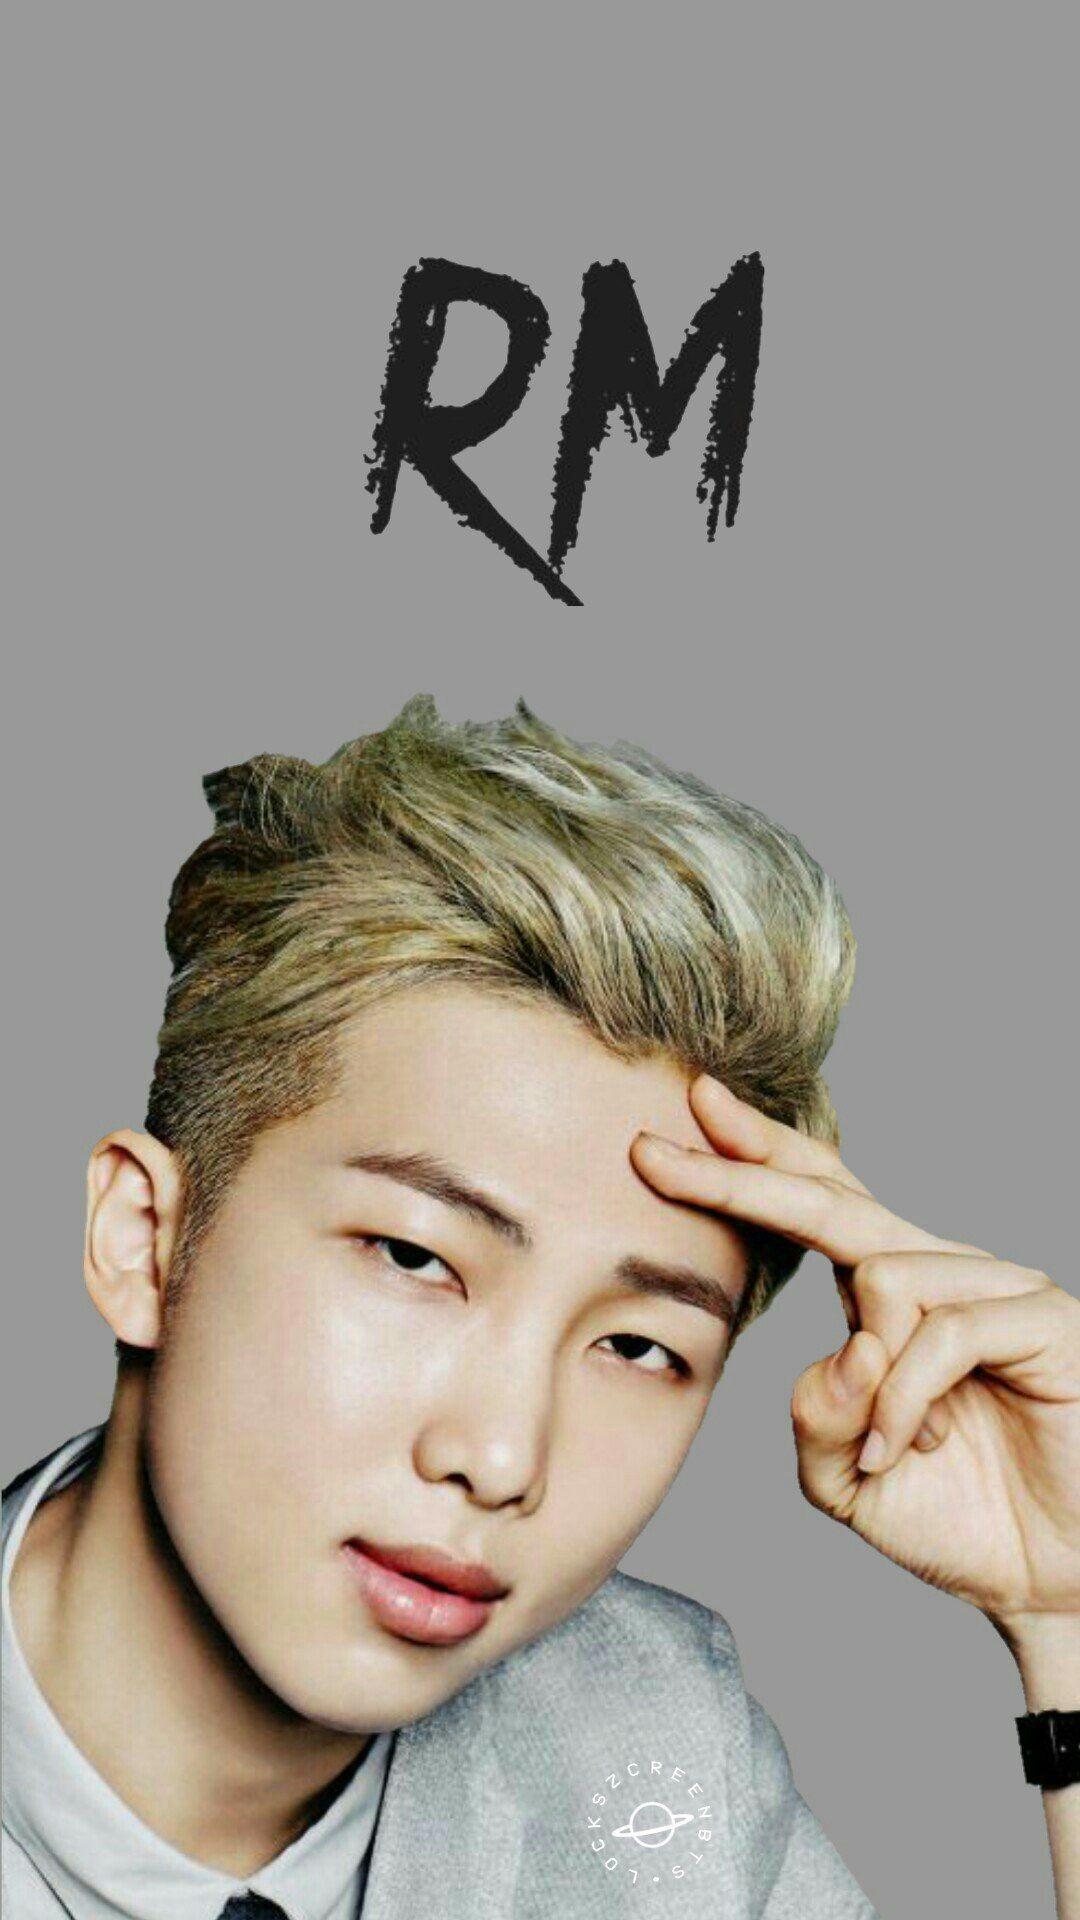 35+ Perfect RM BTS Wallpapers - Wallpaper Cave Free Downloads ...